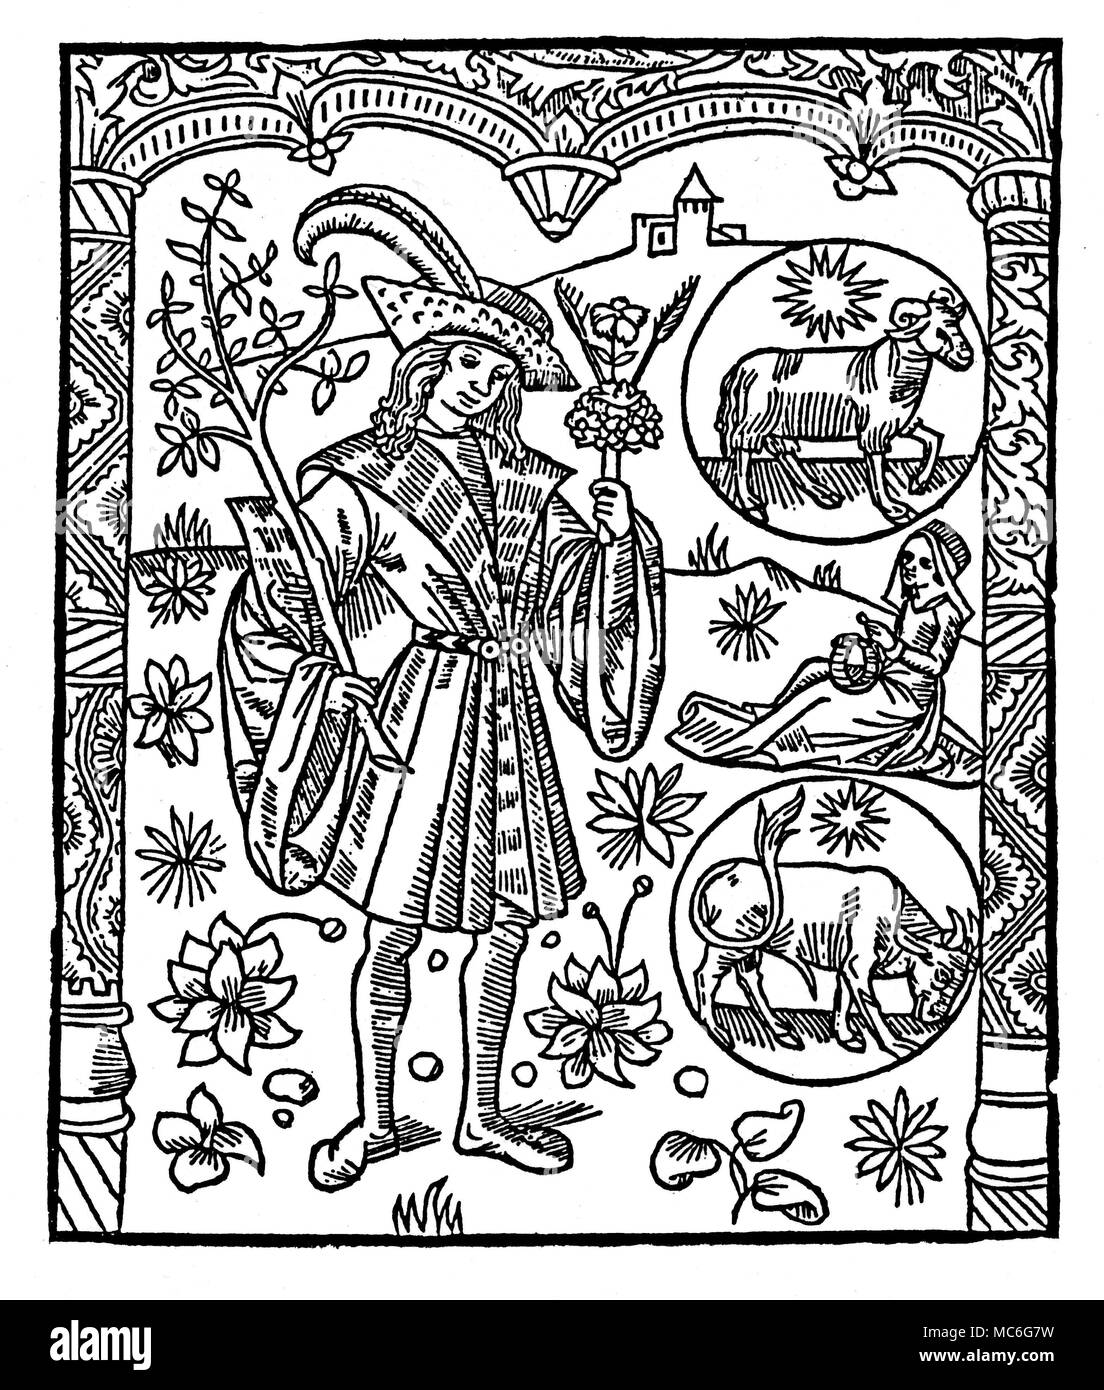 MONTHS - APRIL - ARIES & TAURUS Woodcut depicting lovers - the young man  amorous, with flowers for his beloved. The top roundel is the zodiac image  for Aries, the Ram; the